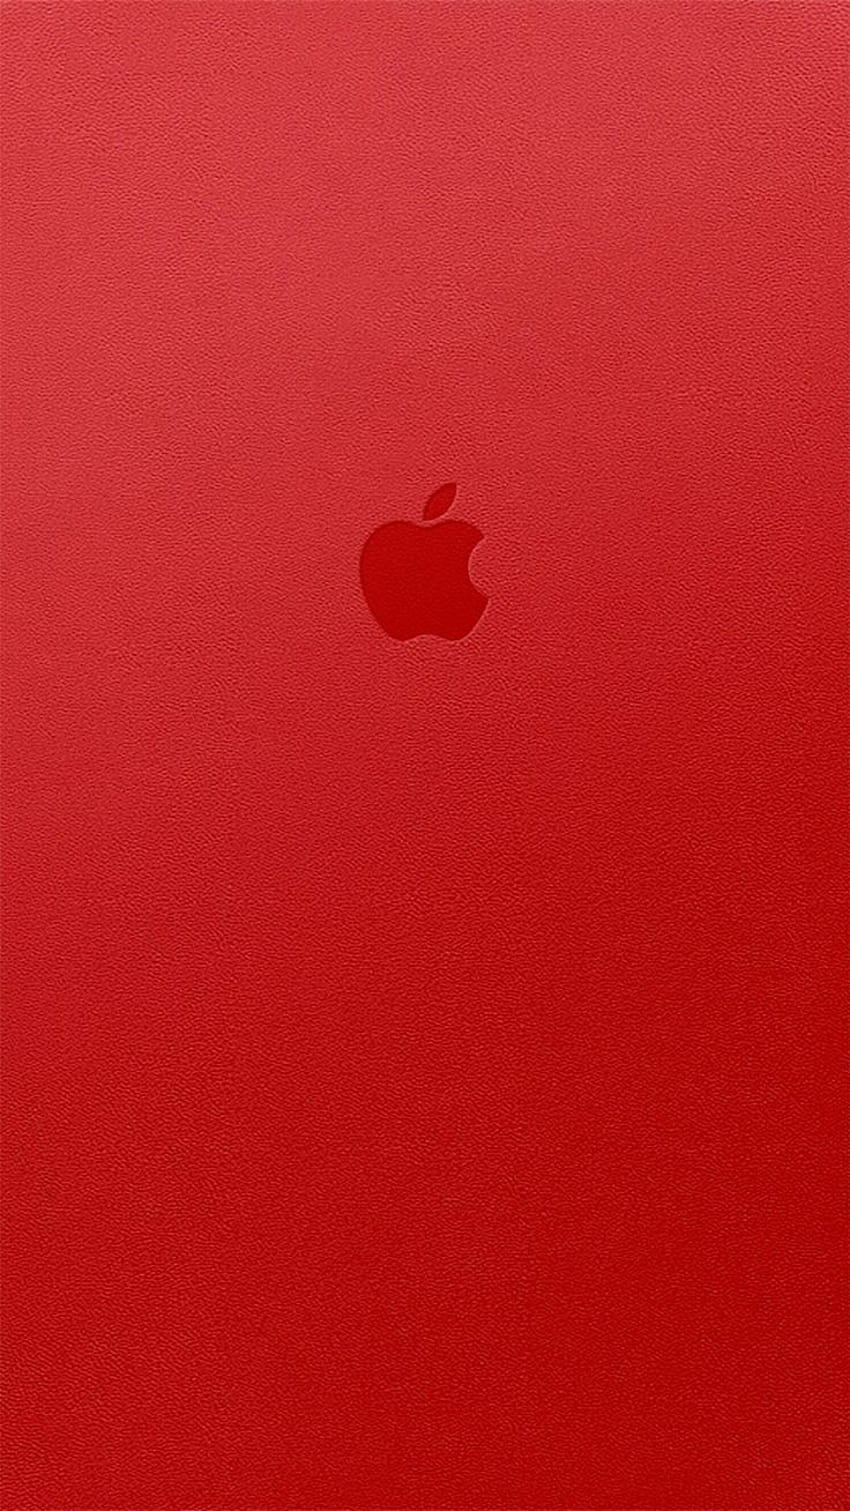 Apple iPhone 6s Plus red, Red Apple Logo 6 HD phone wallpaper